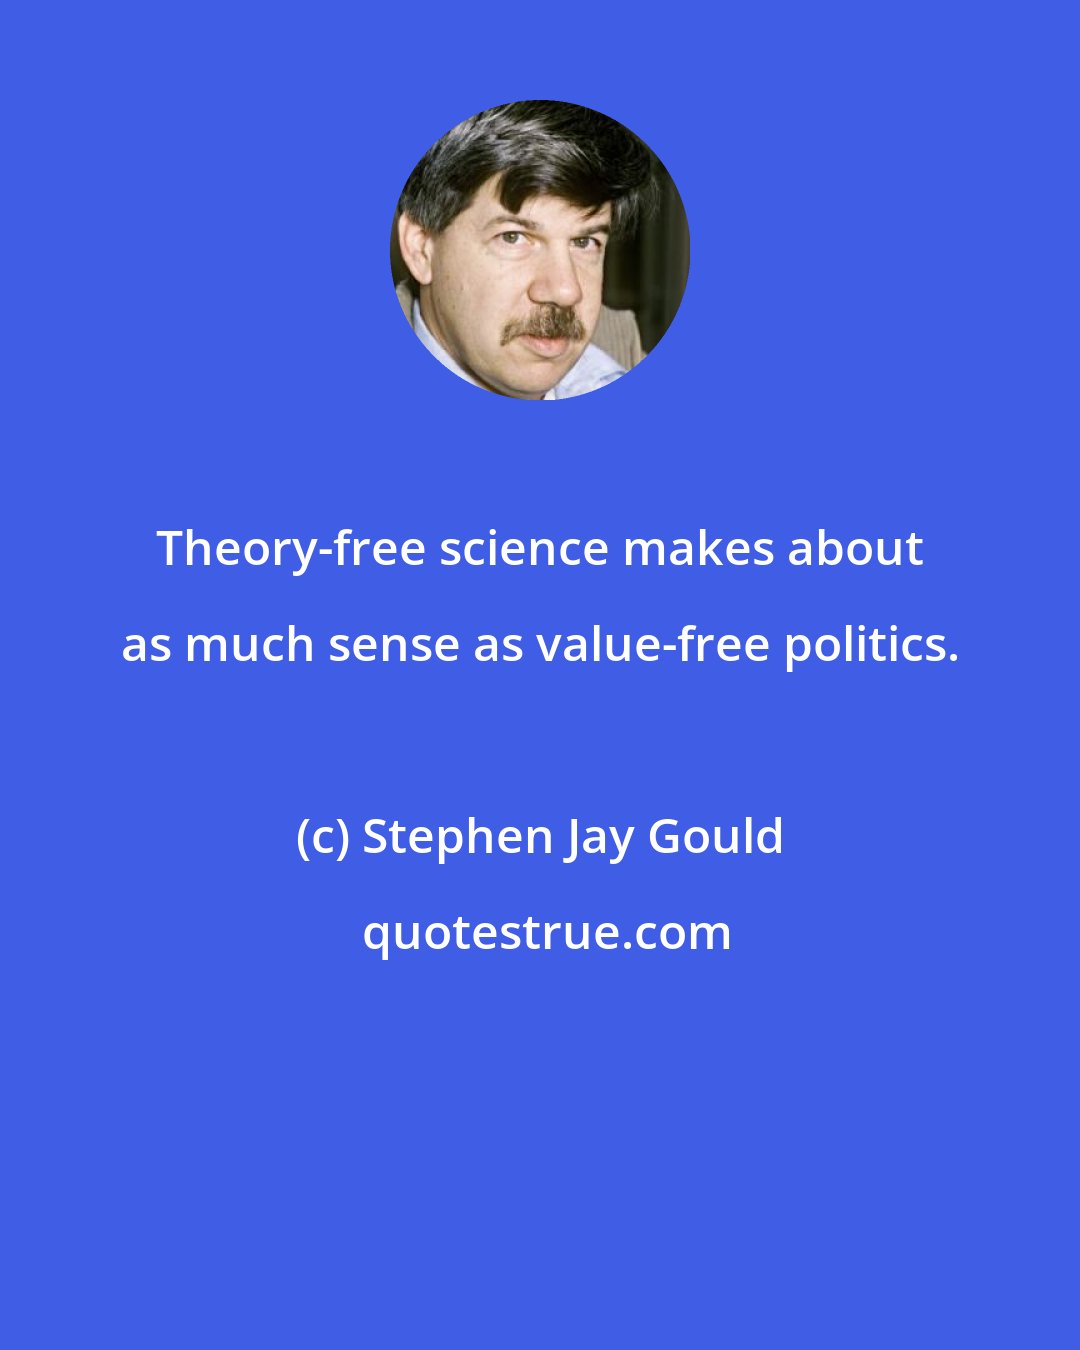 Stephen Jay Gould: Theory-free science makes about as much sense as value-free politics.